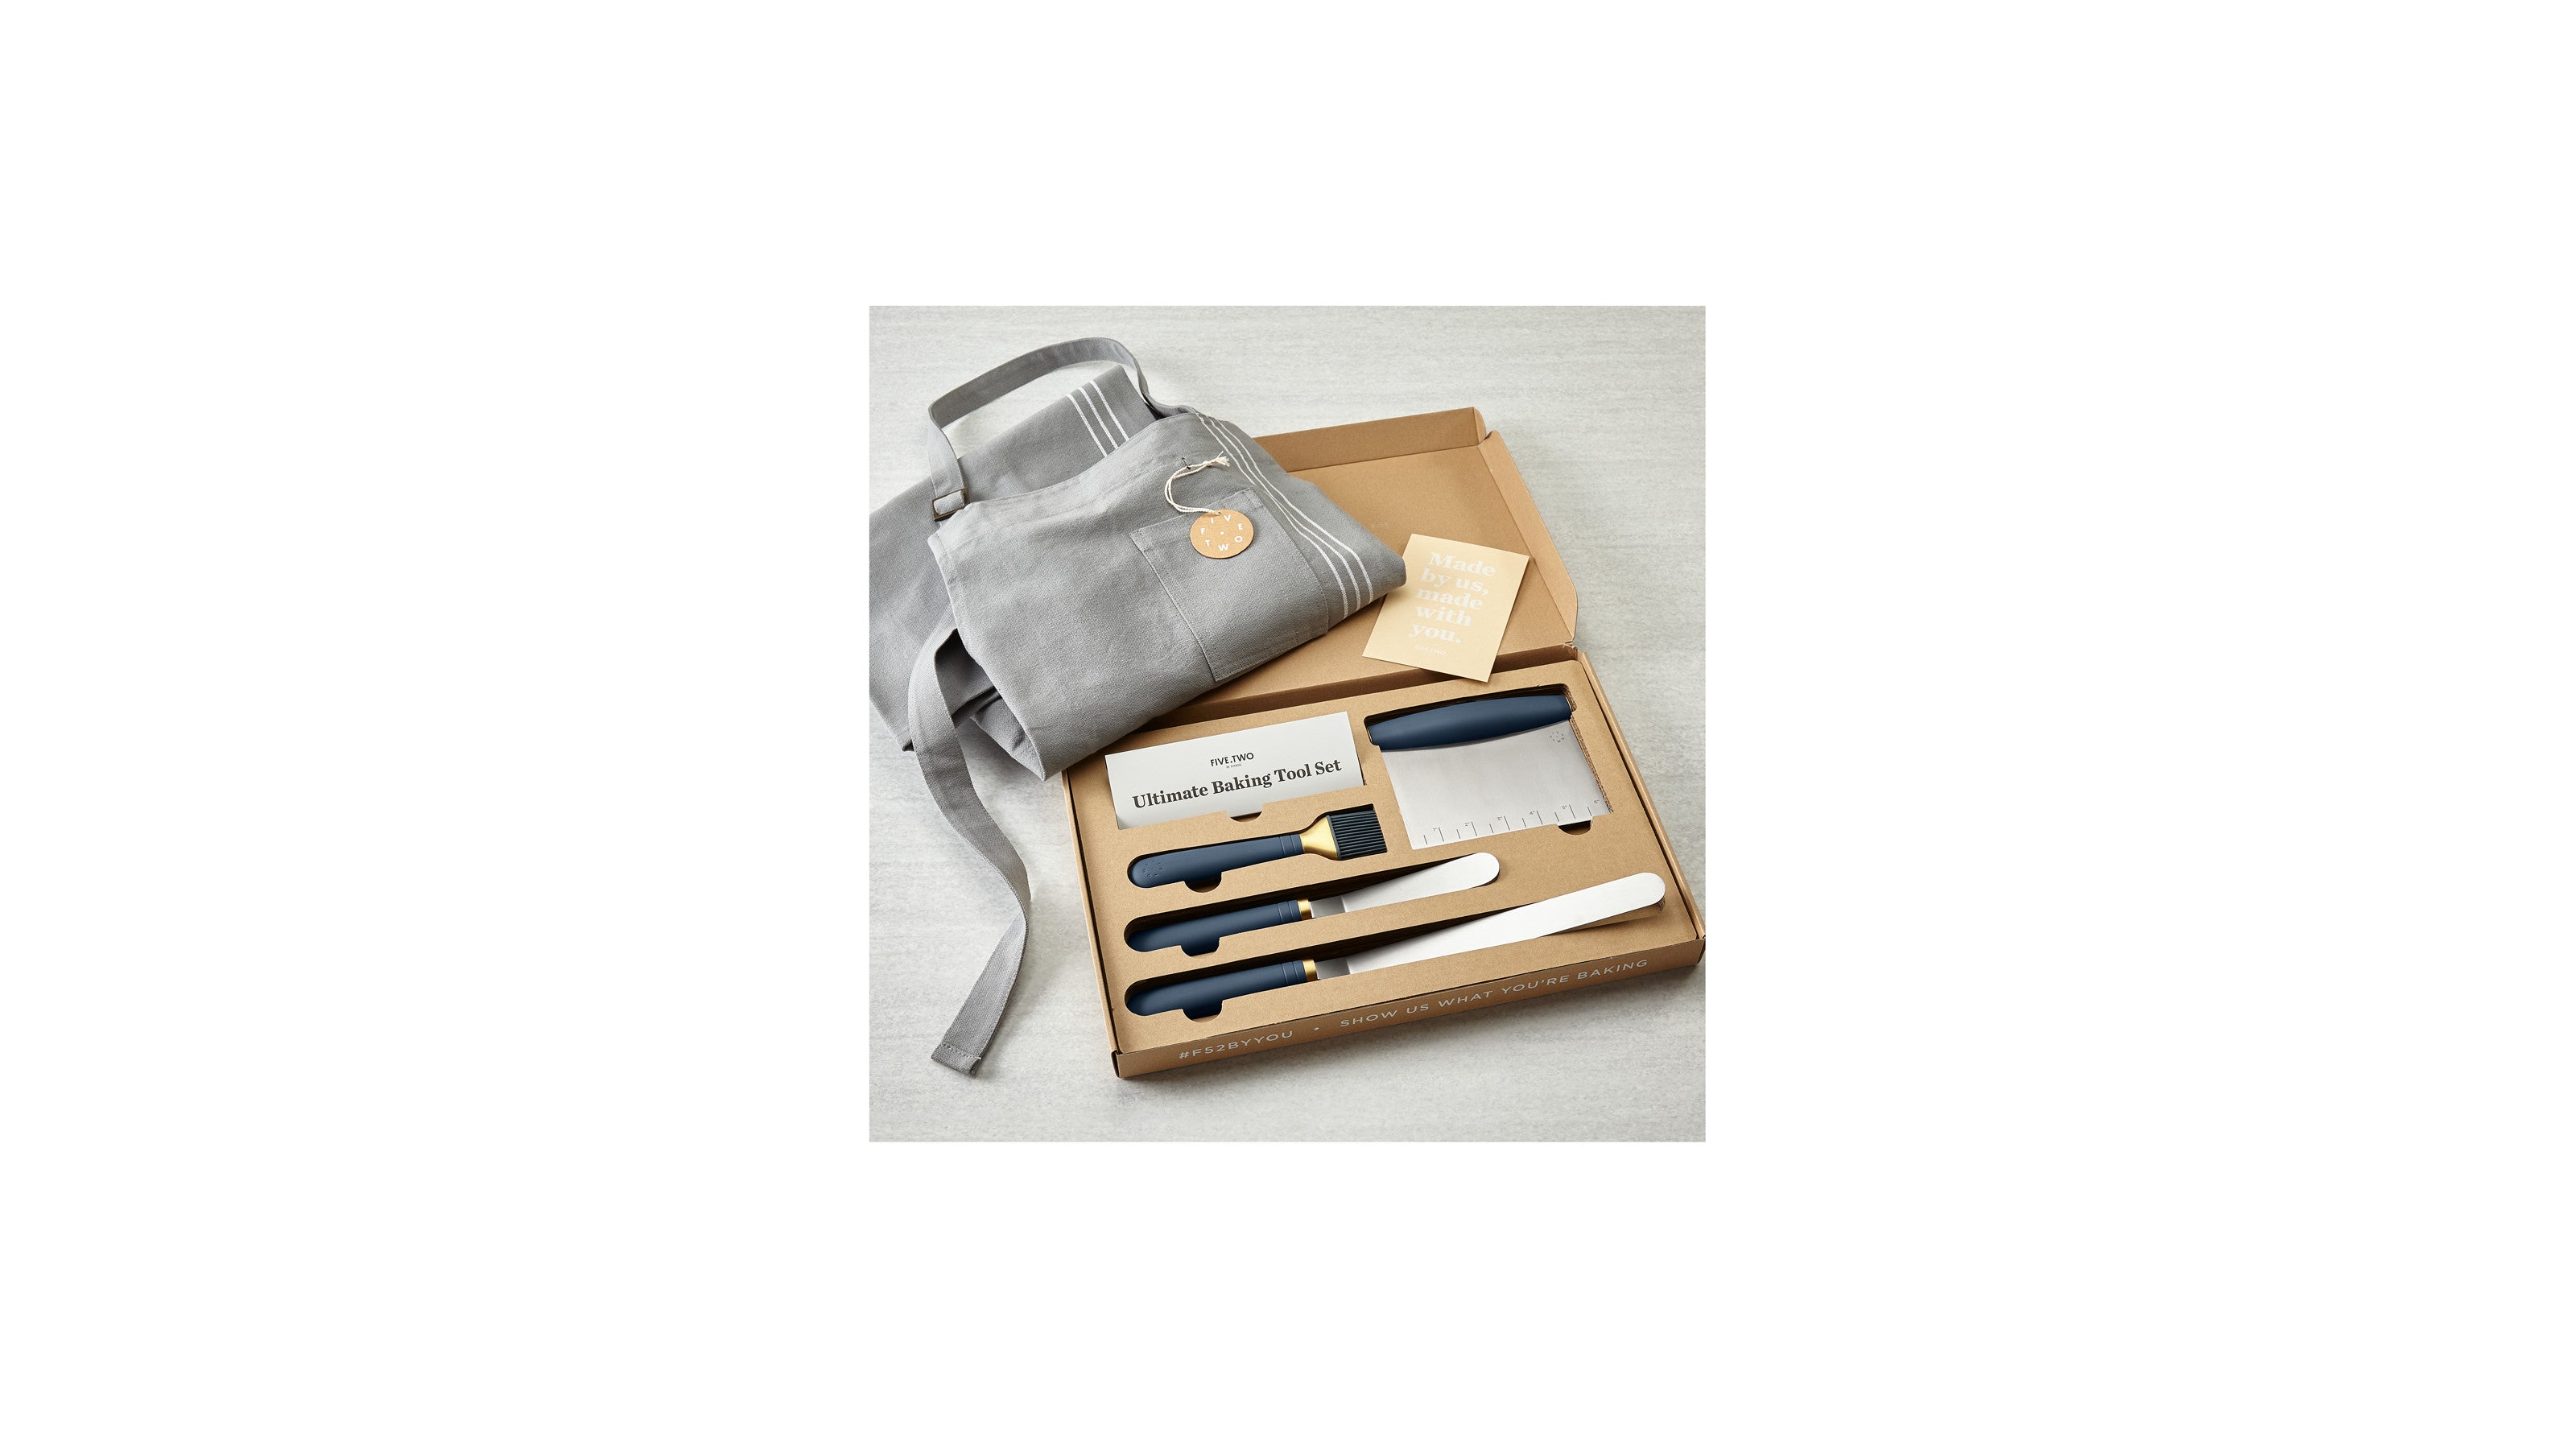 Food52 Five Two Ultimate Baking Tool Set review - Reviewed